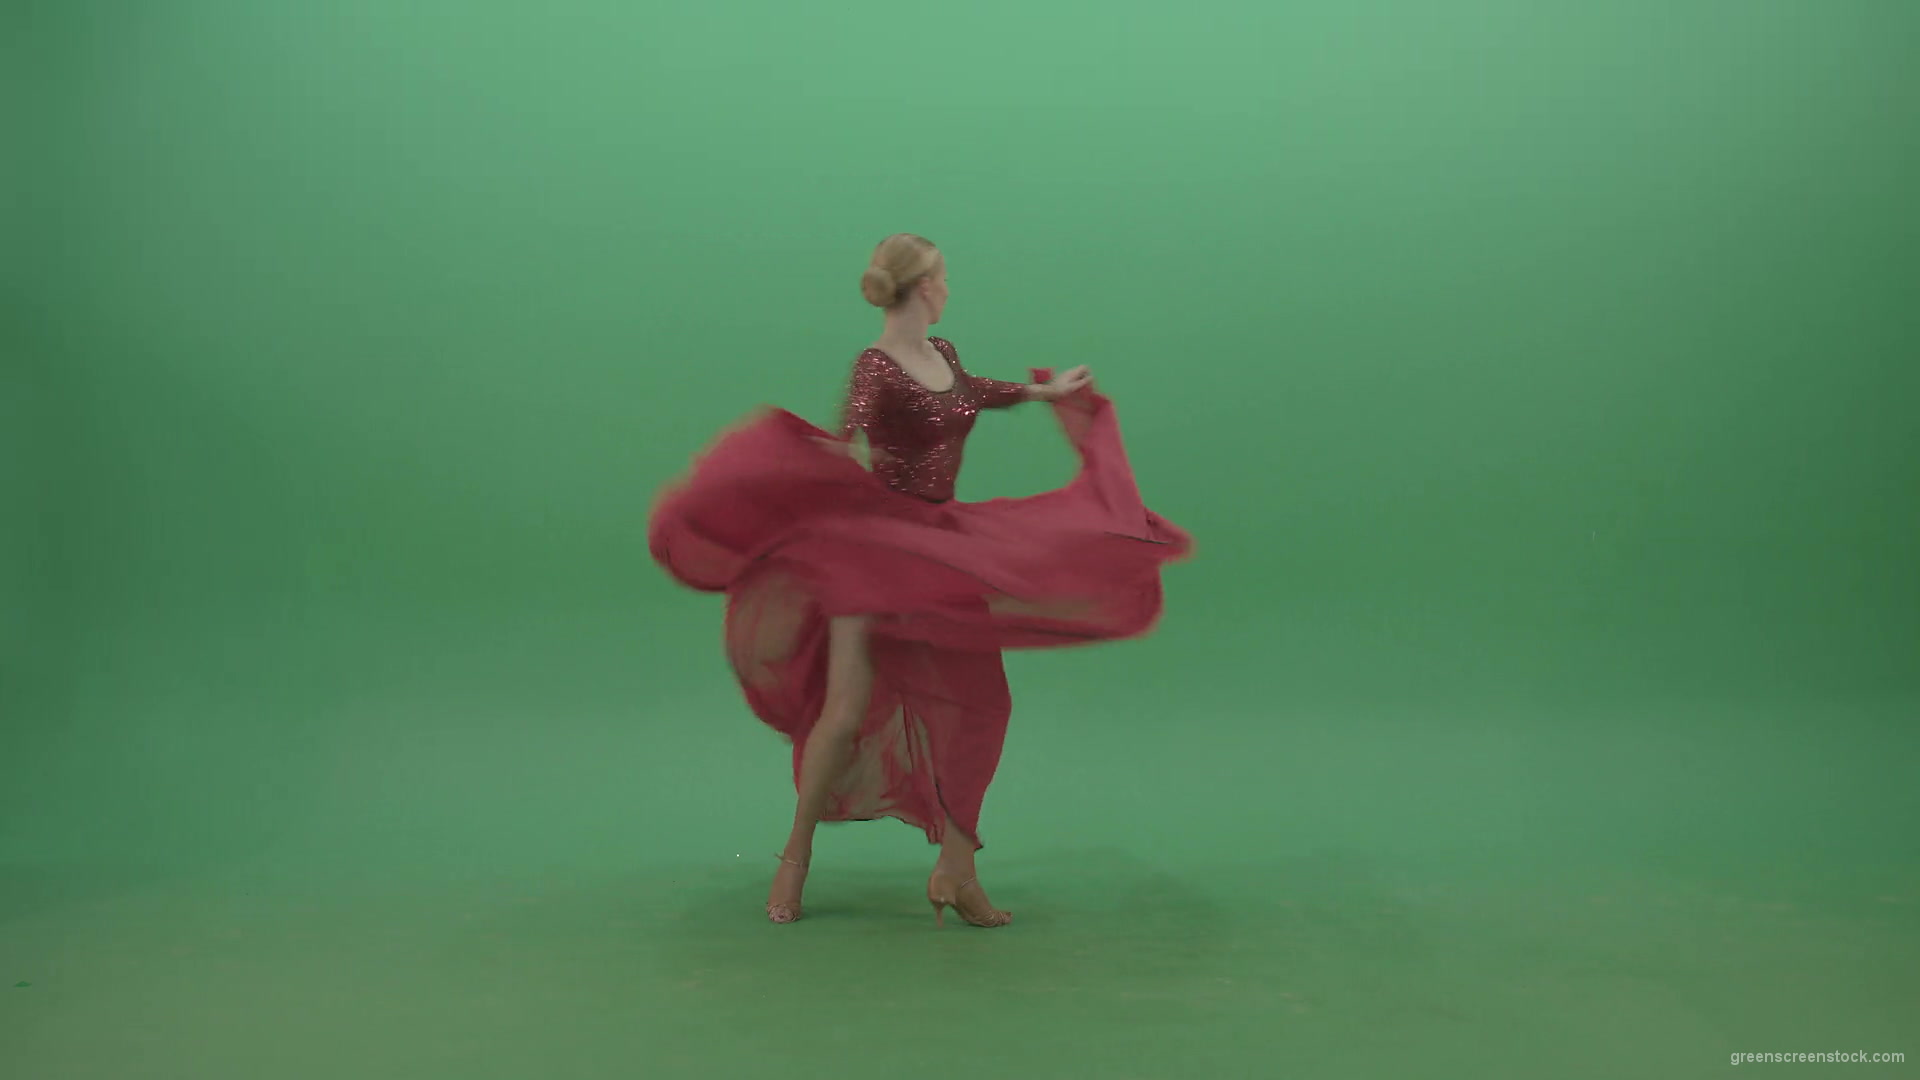 Spinning-woman-in-red-dress-showing-dance-flamenco-moves-over-green-screen-4K-Video-Footage-1920_004 Green Screen Stock